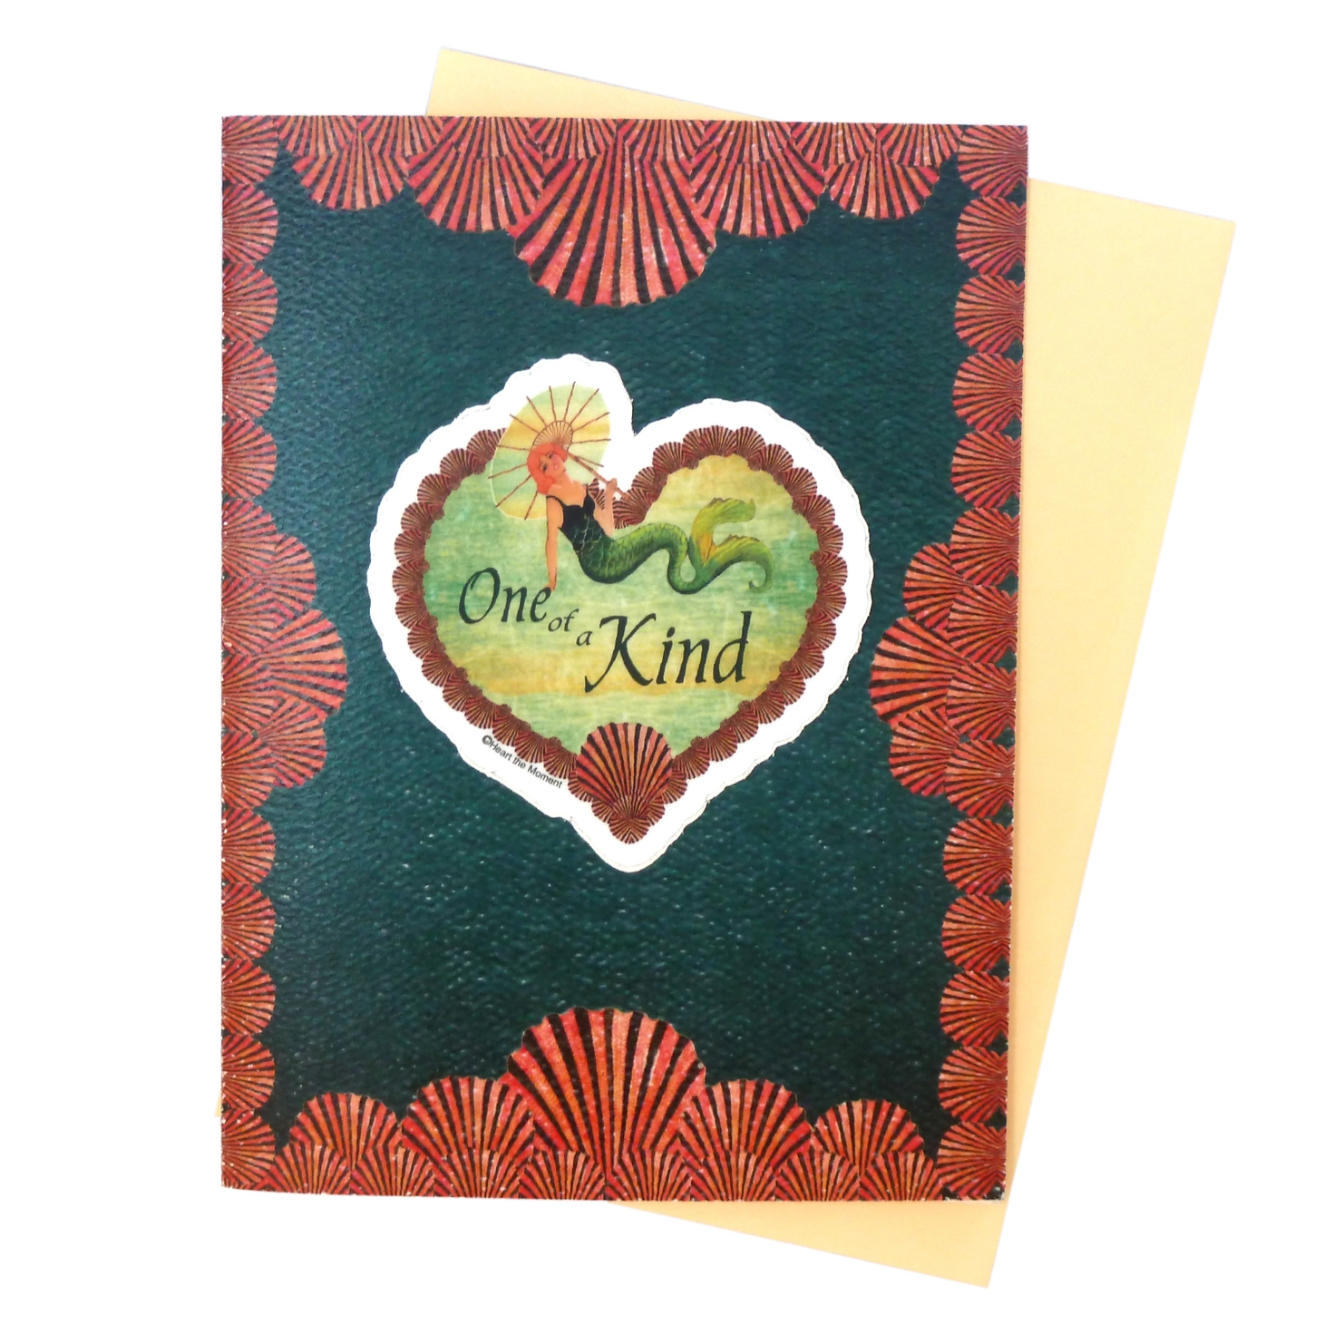 “ONE OF A KIND” Greeting Card with Detachable Vinyl Sticker - B